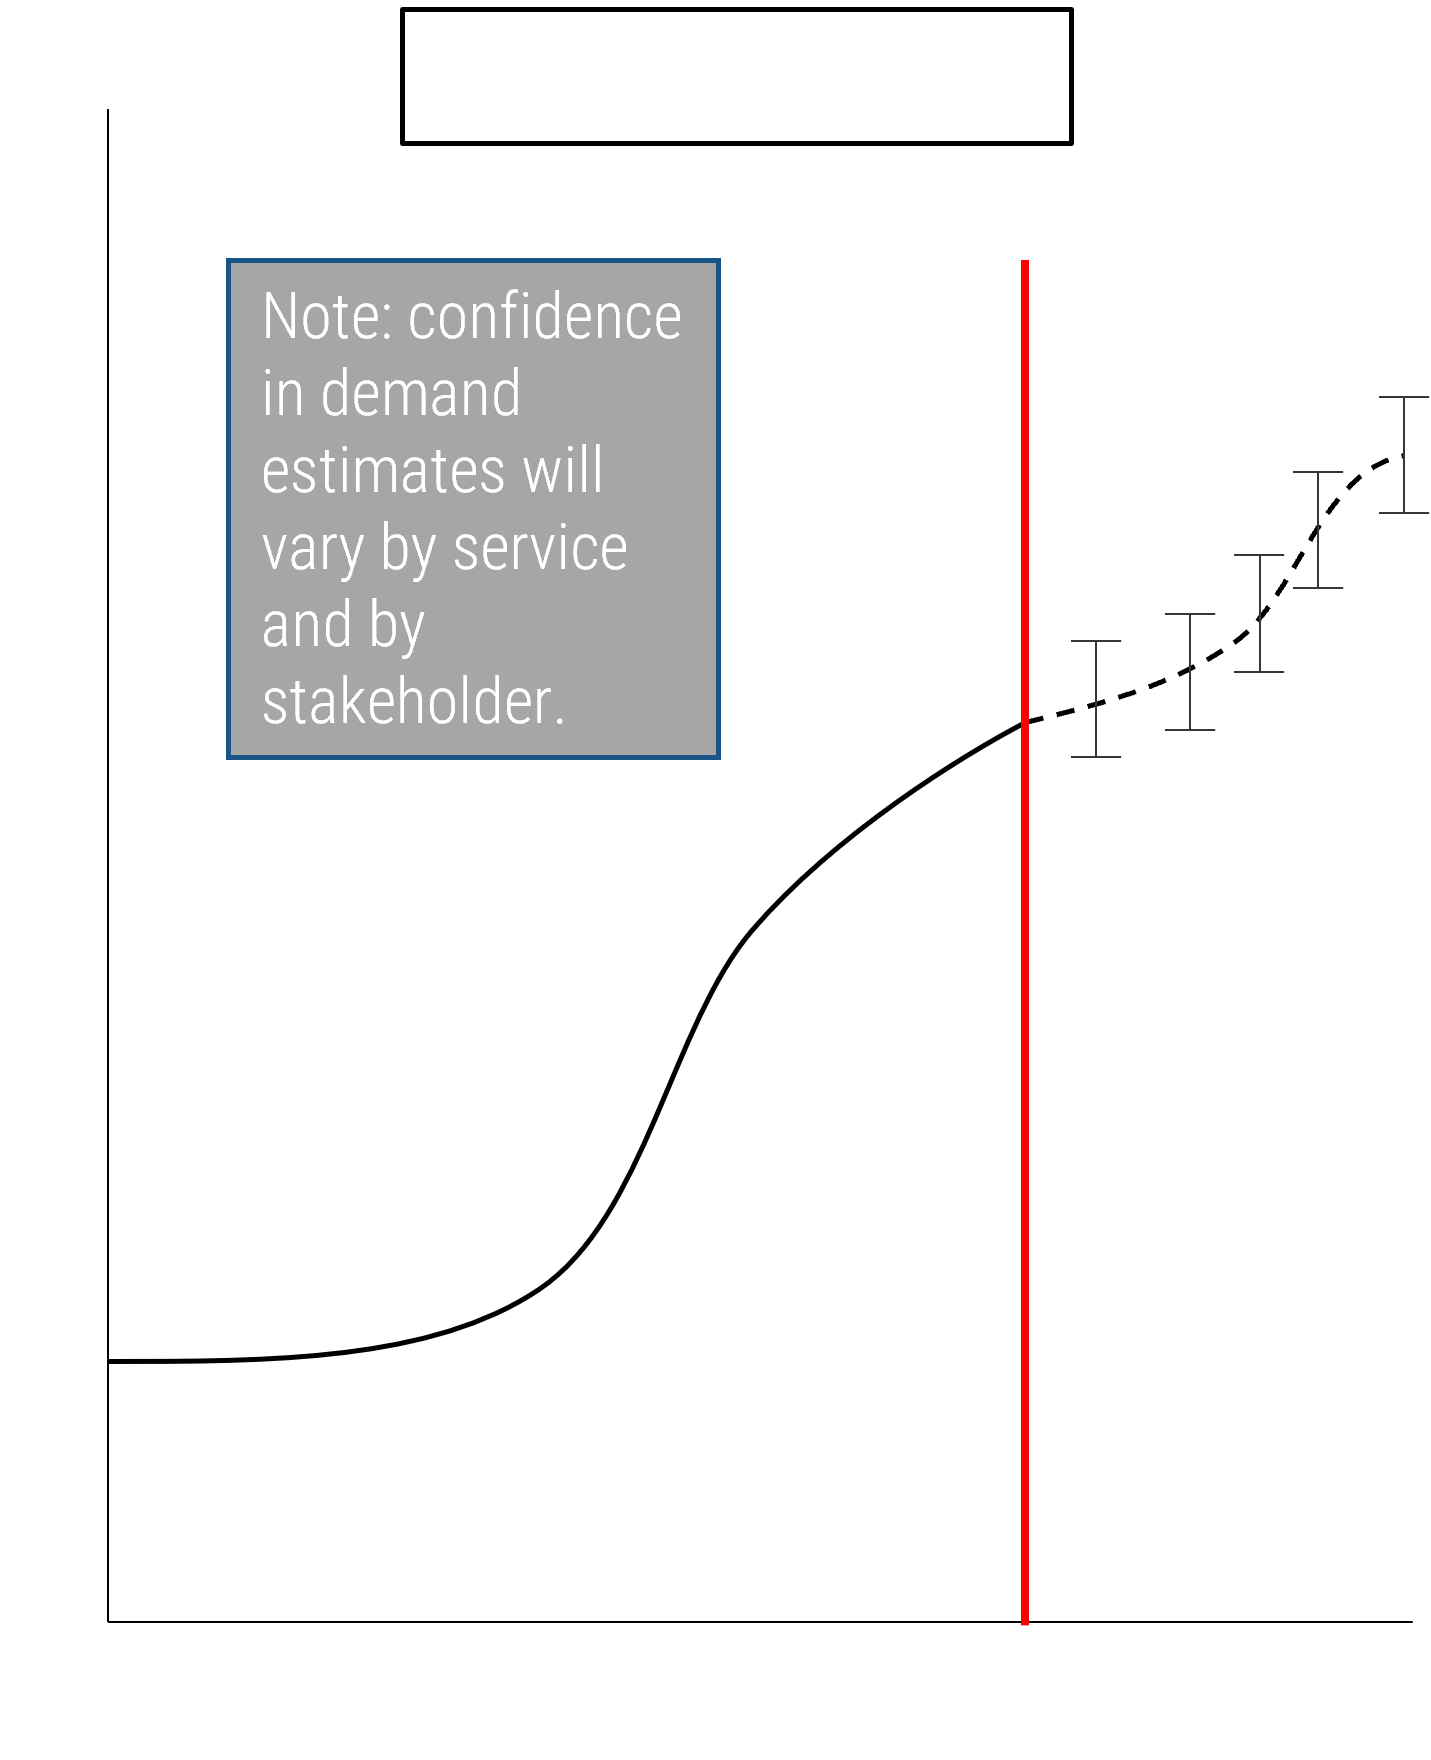 Graph titled 'Projected demand' with axes 'Demand' and 'Time', a value line curving to the top right, and a vertical red line bisecting it labelled 'Present'. A note says 'Note: confidence in demand estimates will vary by service and by stakeholder.'